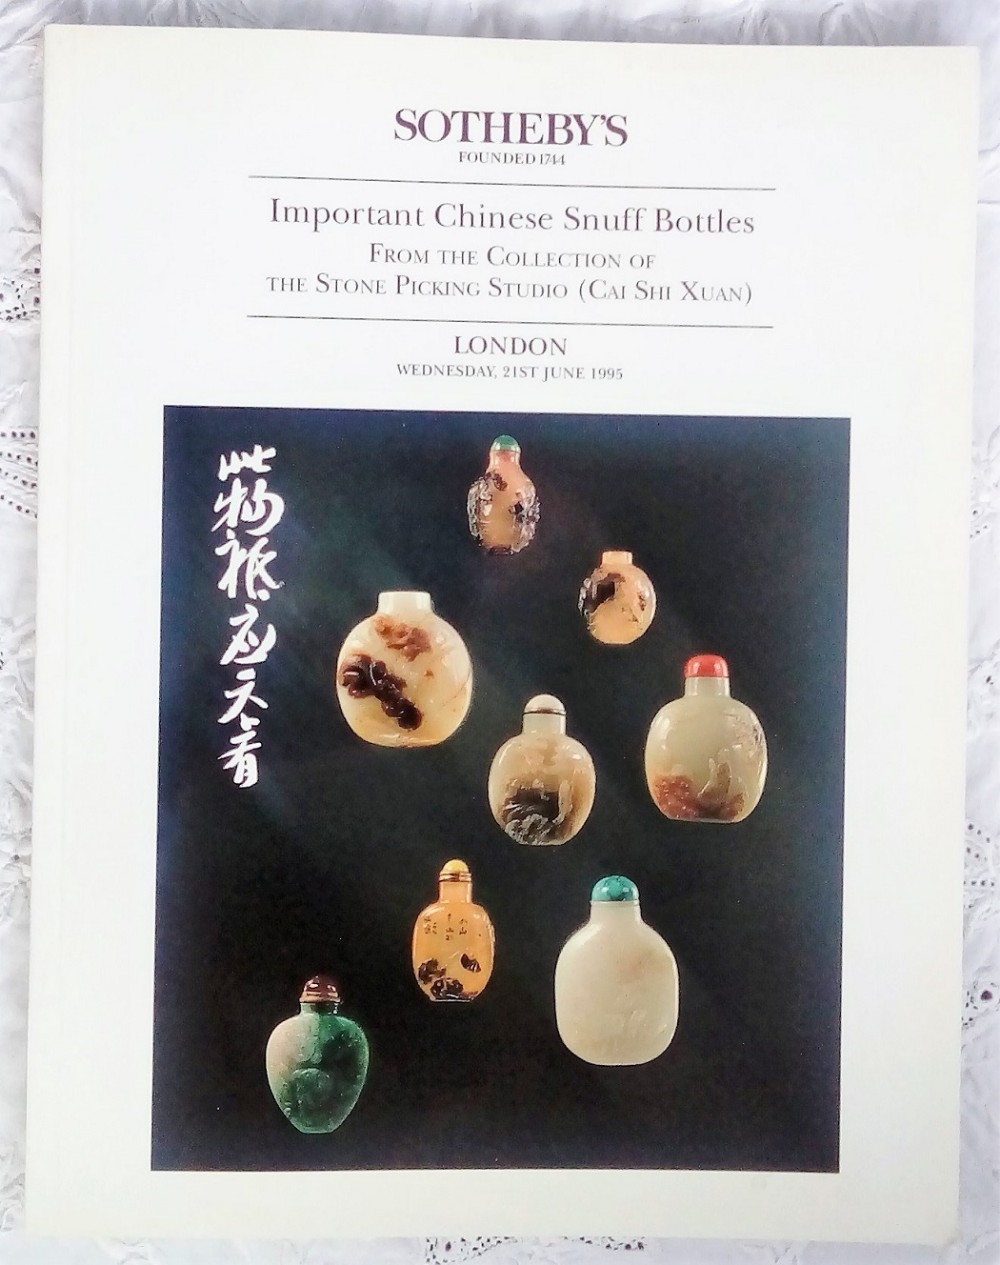 sotheby's important chinese snuff bottles from the collection of the stone picking studio cai shi xuan london 21 06 1995